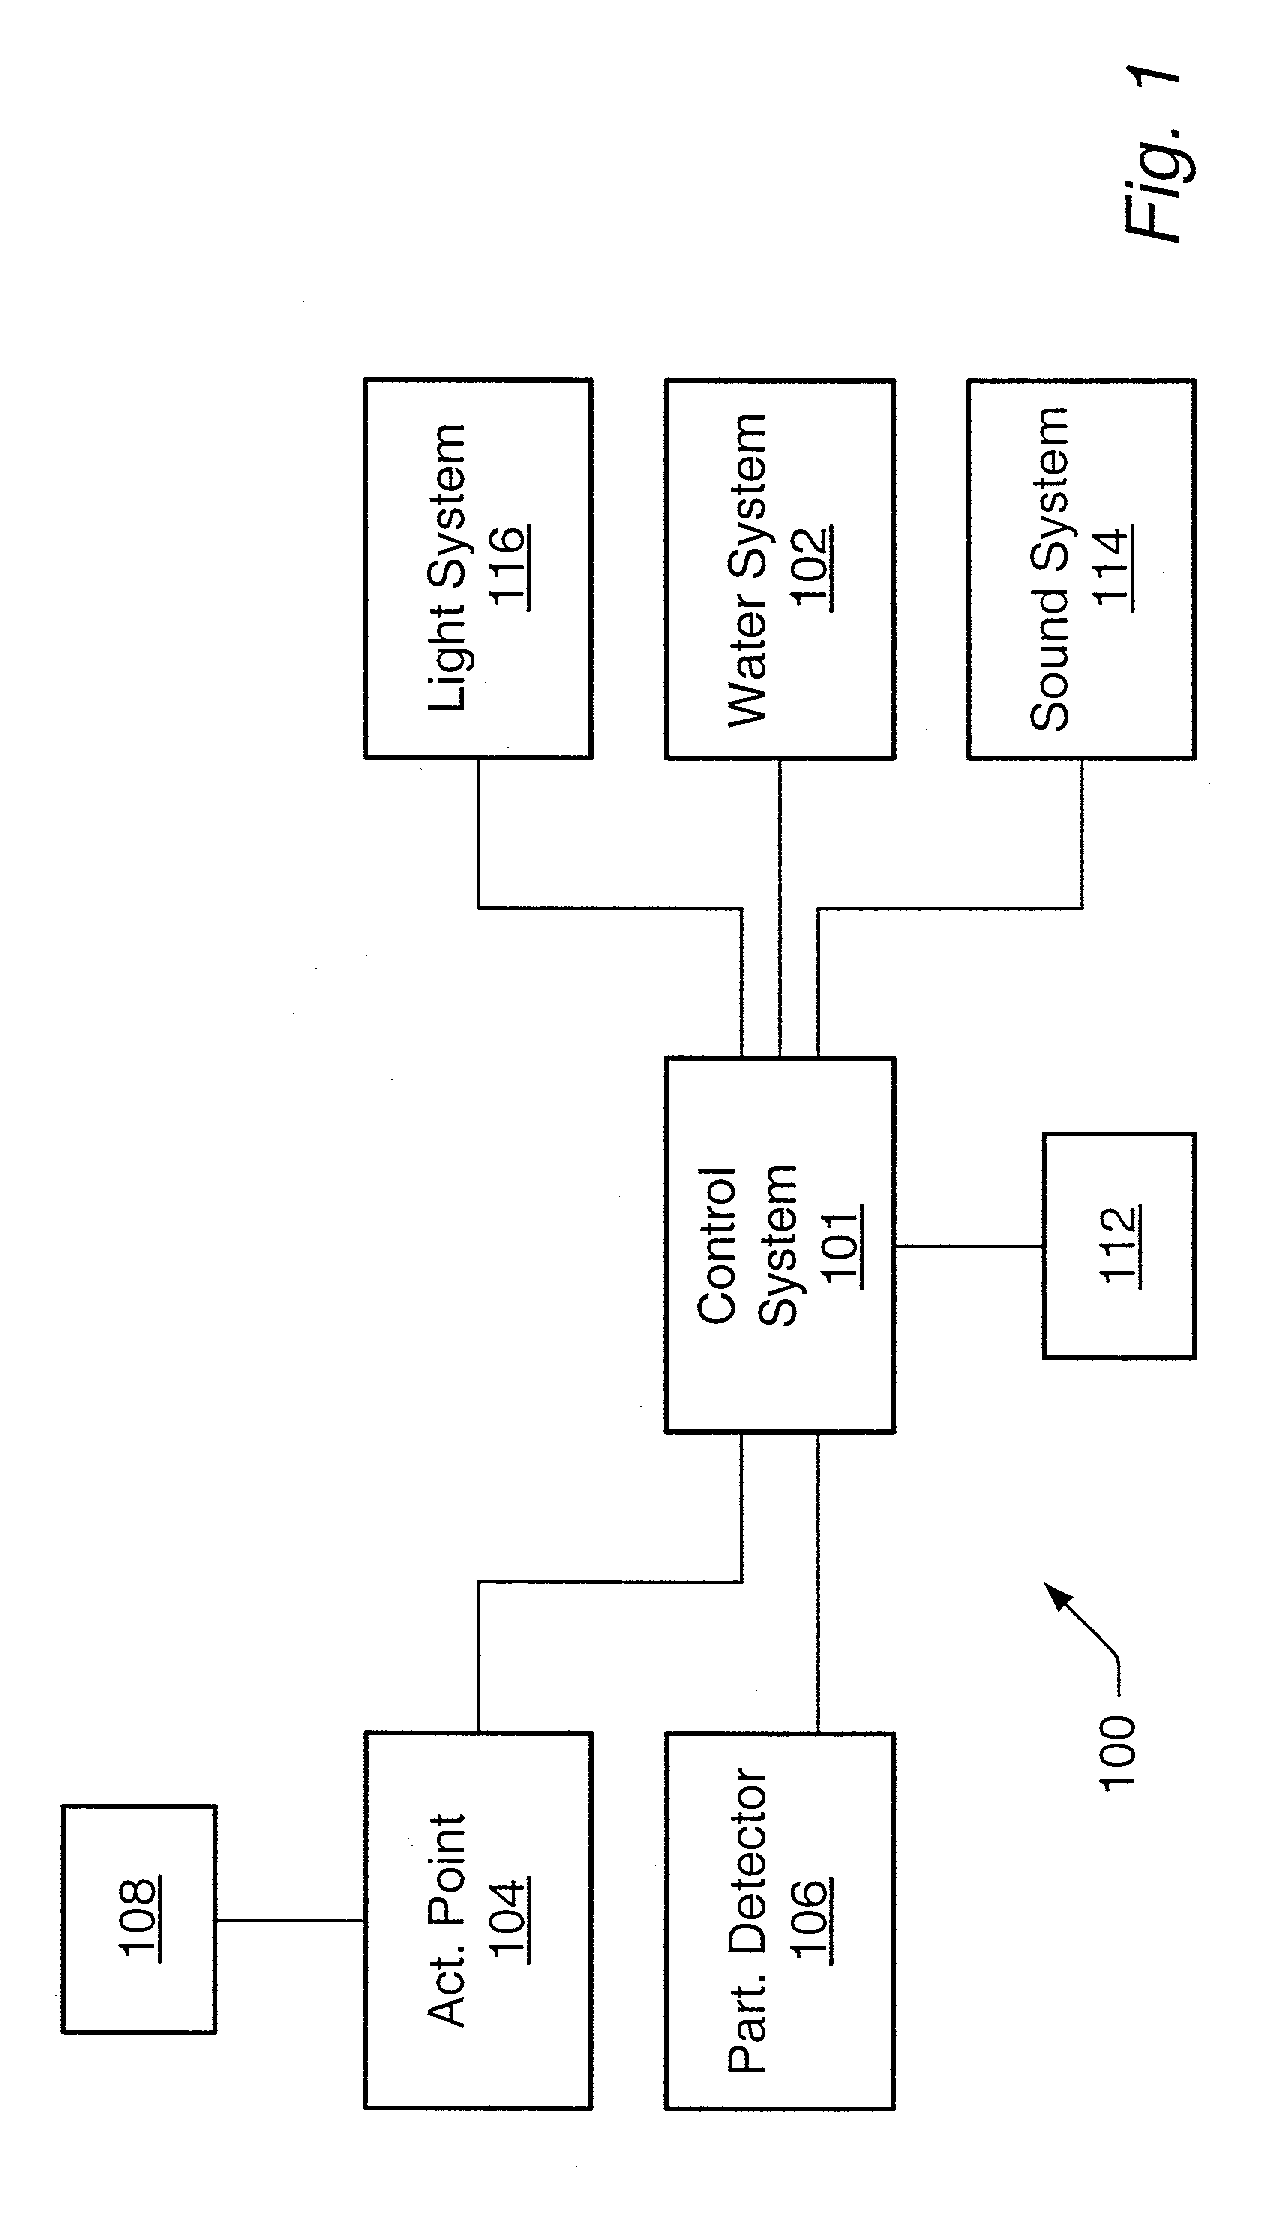 Control system for water amusement devices